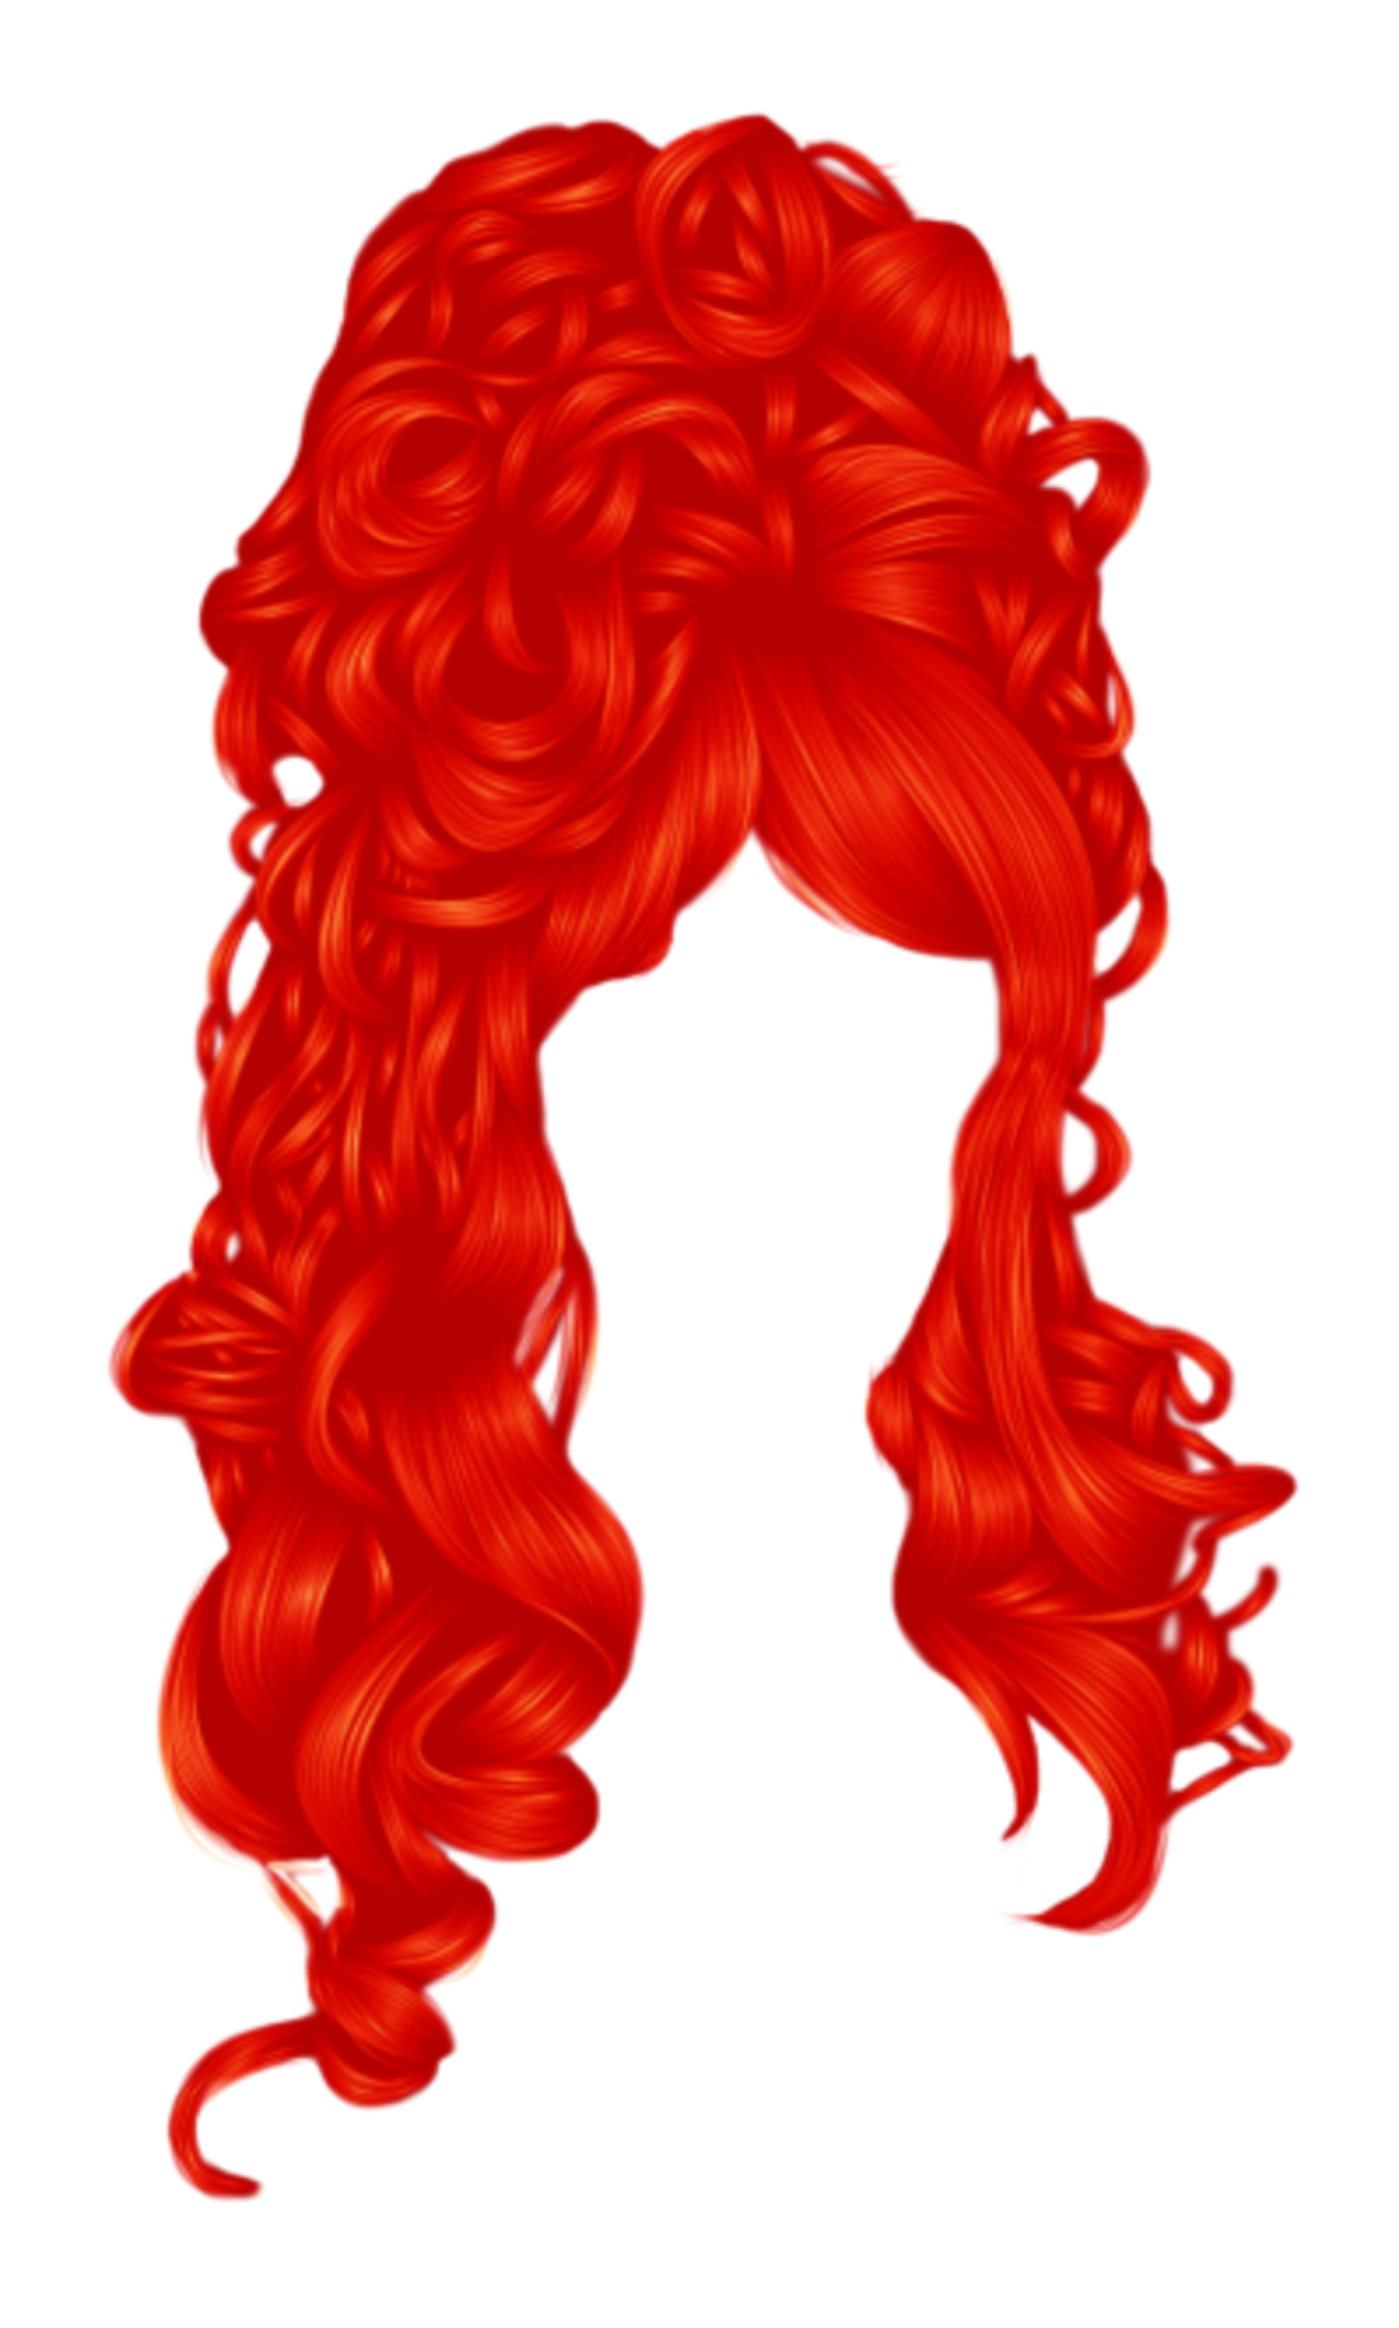 hair wig red freetoedit #hair #wig sticker by @ionabondlopez